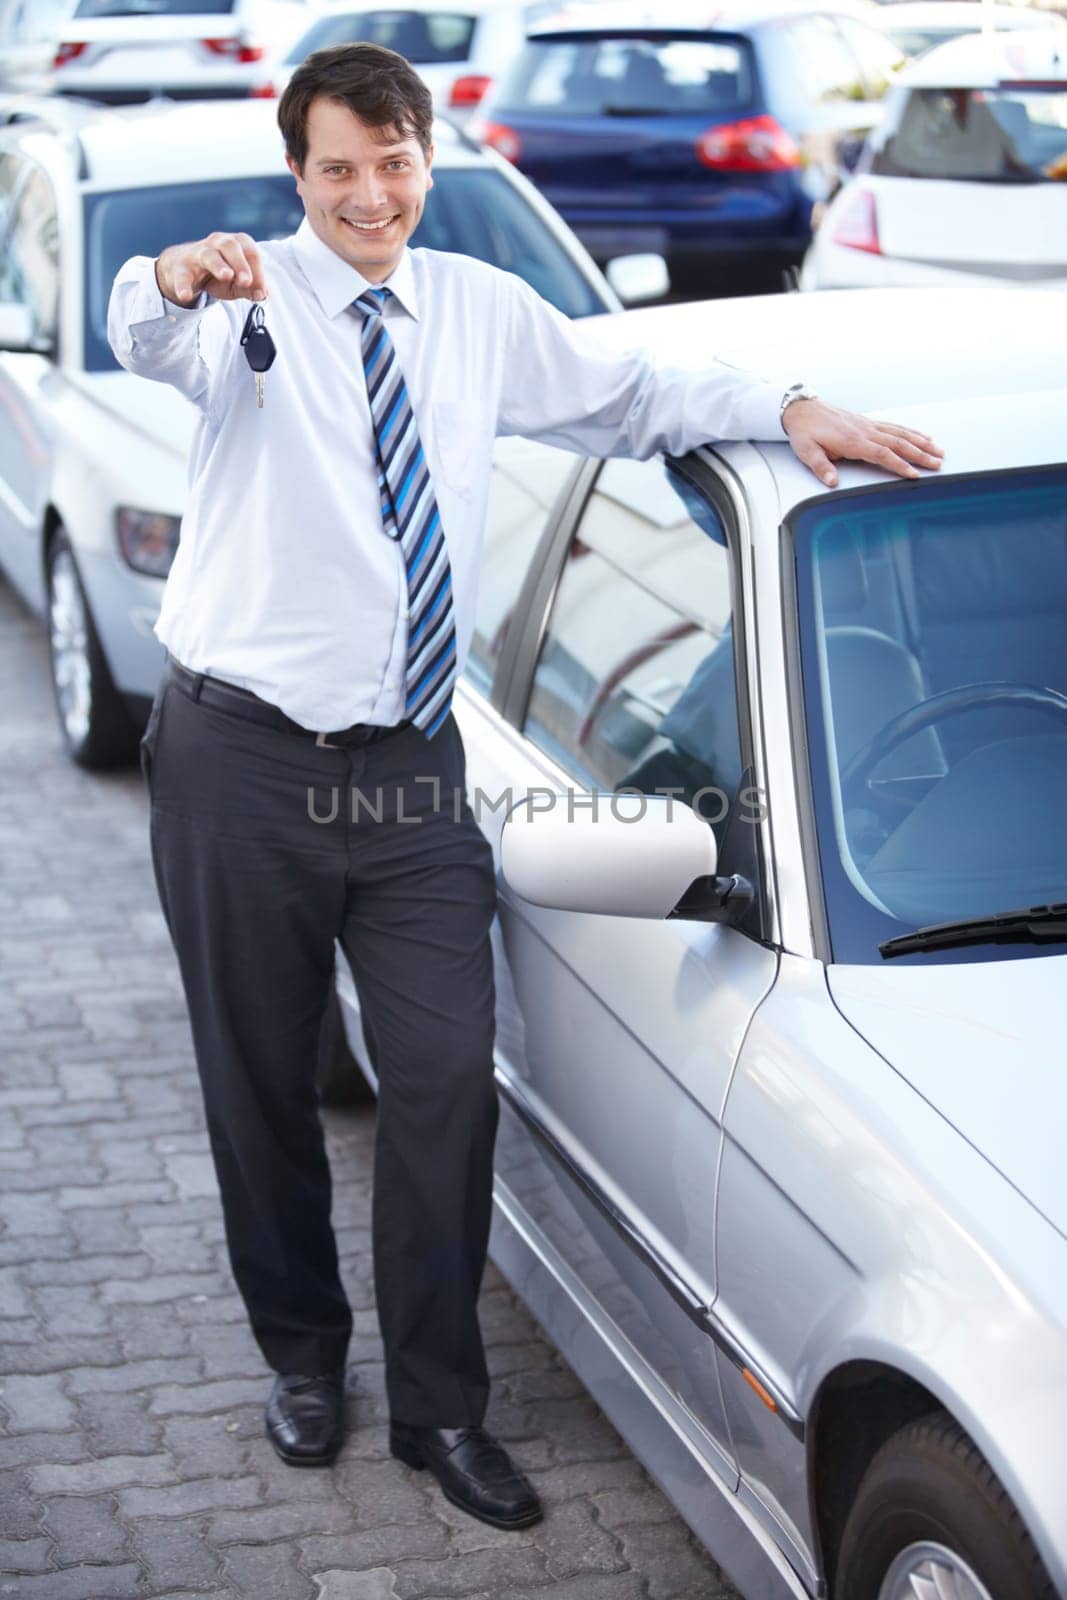 Businessman, portrait and key in hand to car with sale of auto, transportation and investment. Vehicle, dealership or man with keys in parking lot from salesman for test drive, opportunity or driving.